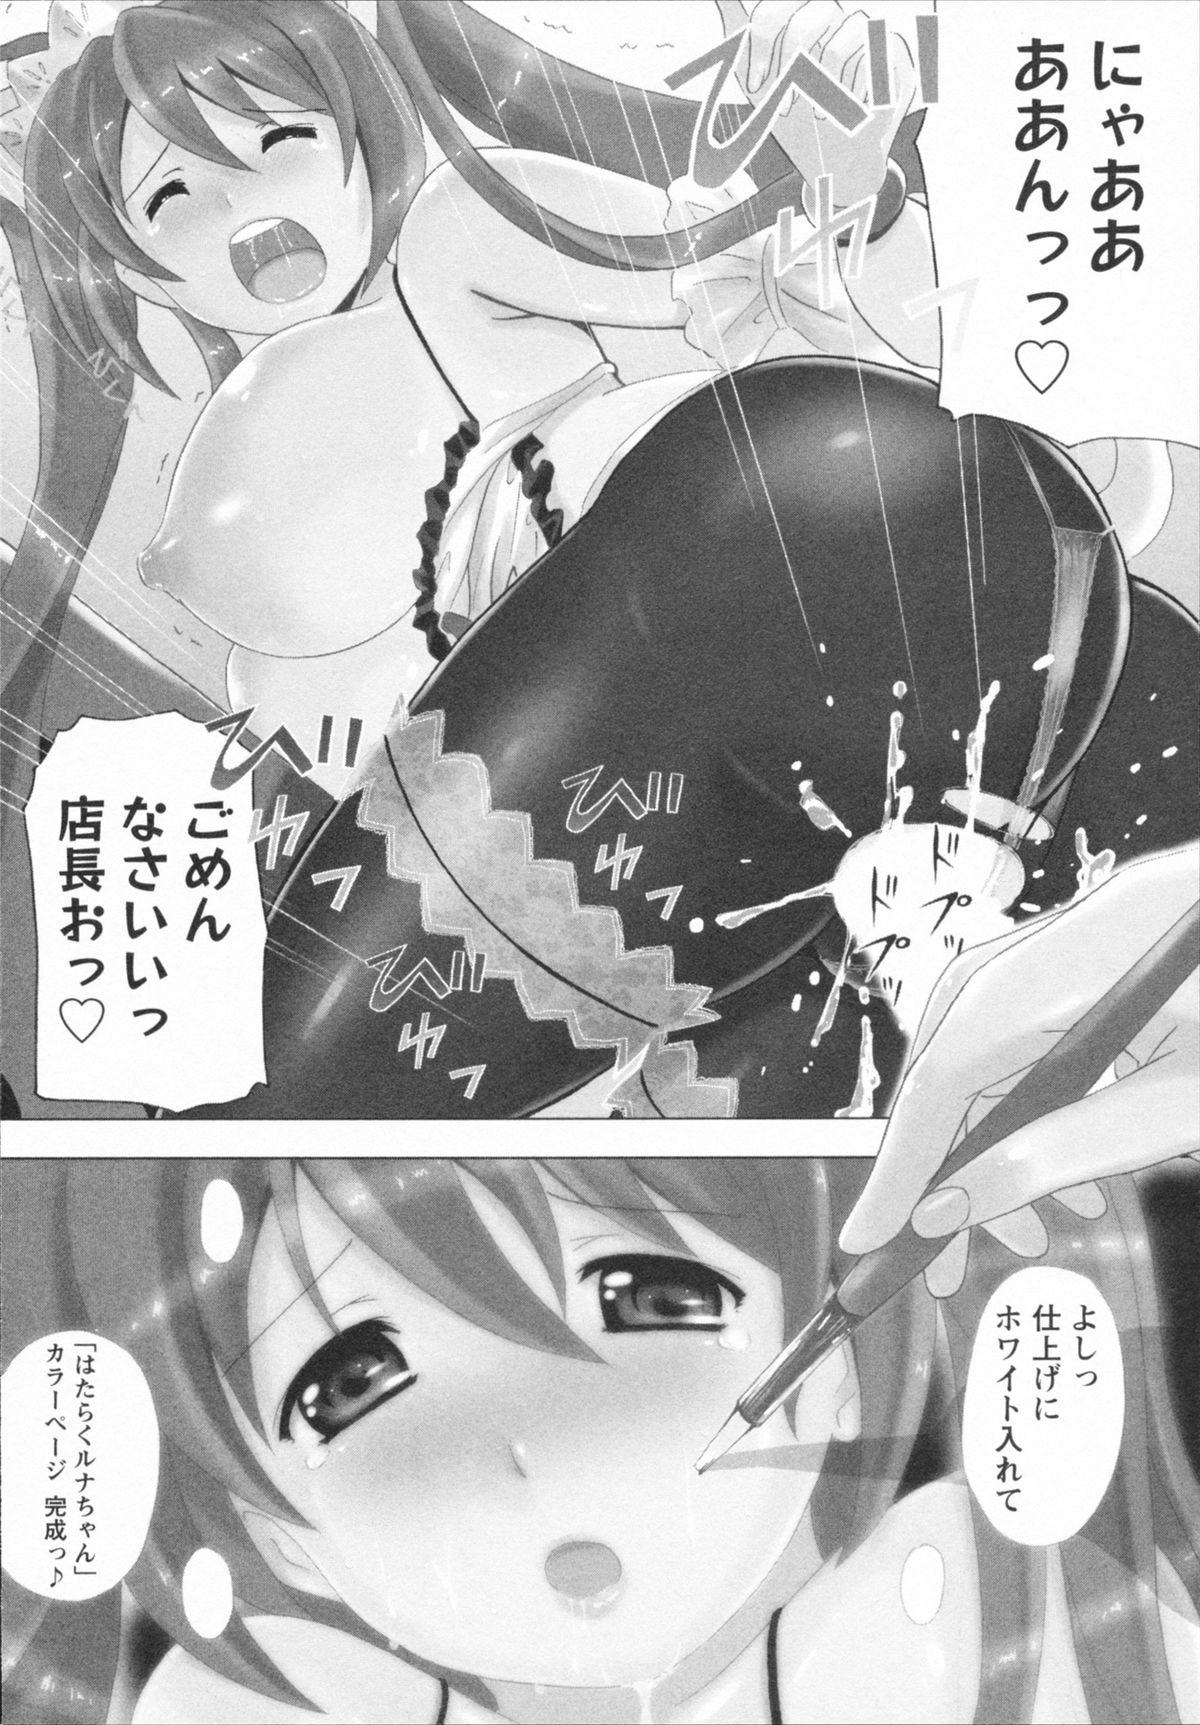 Solo Girl HB na Kanojo - HB Girl Friend Gay Oralsex - Page 10